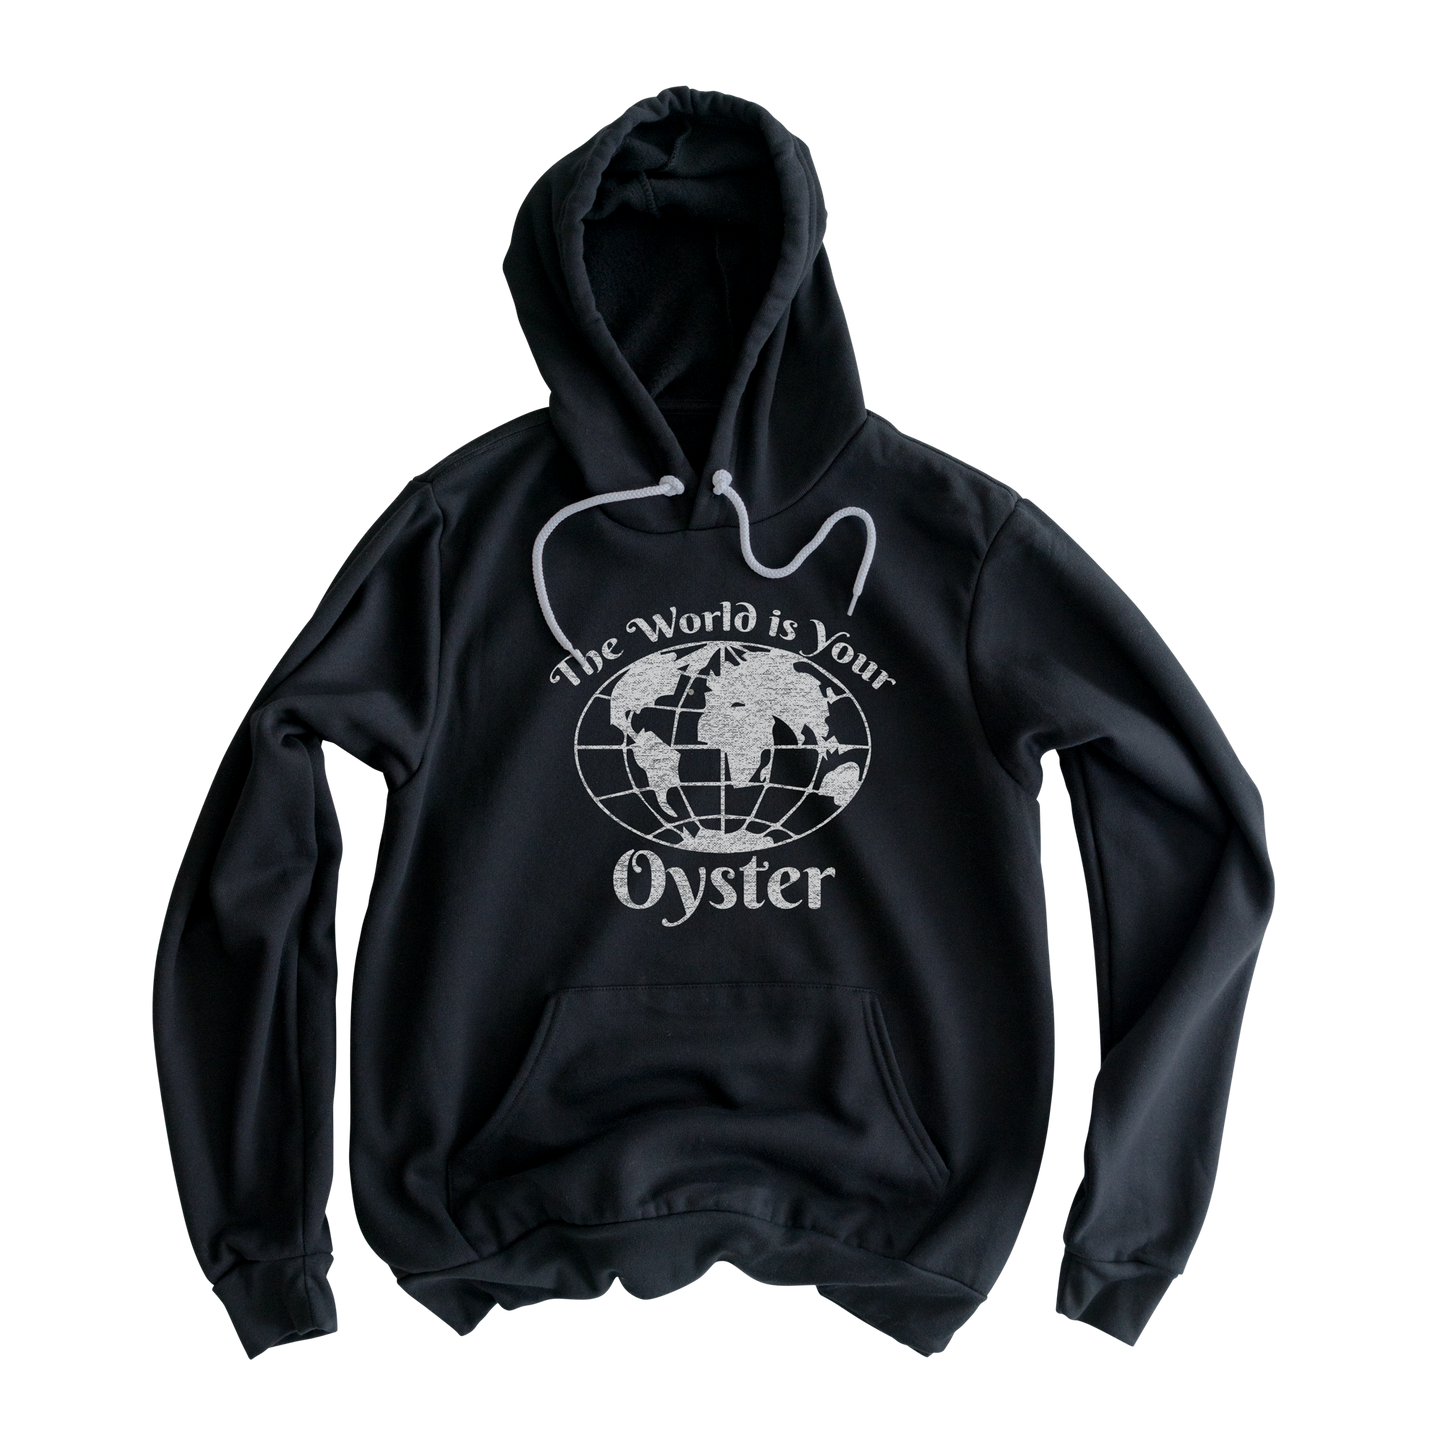 The World is Your Oyster Hooded Sweatshirt